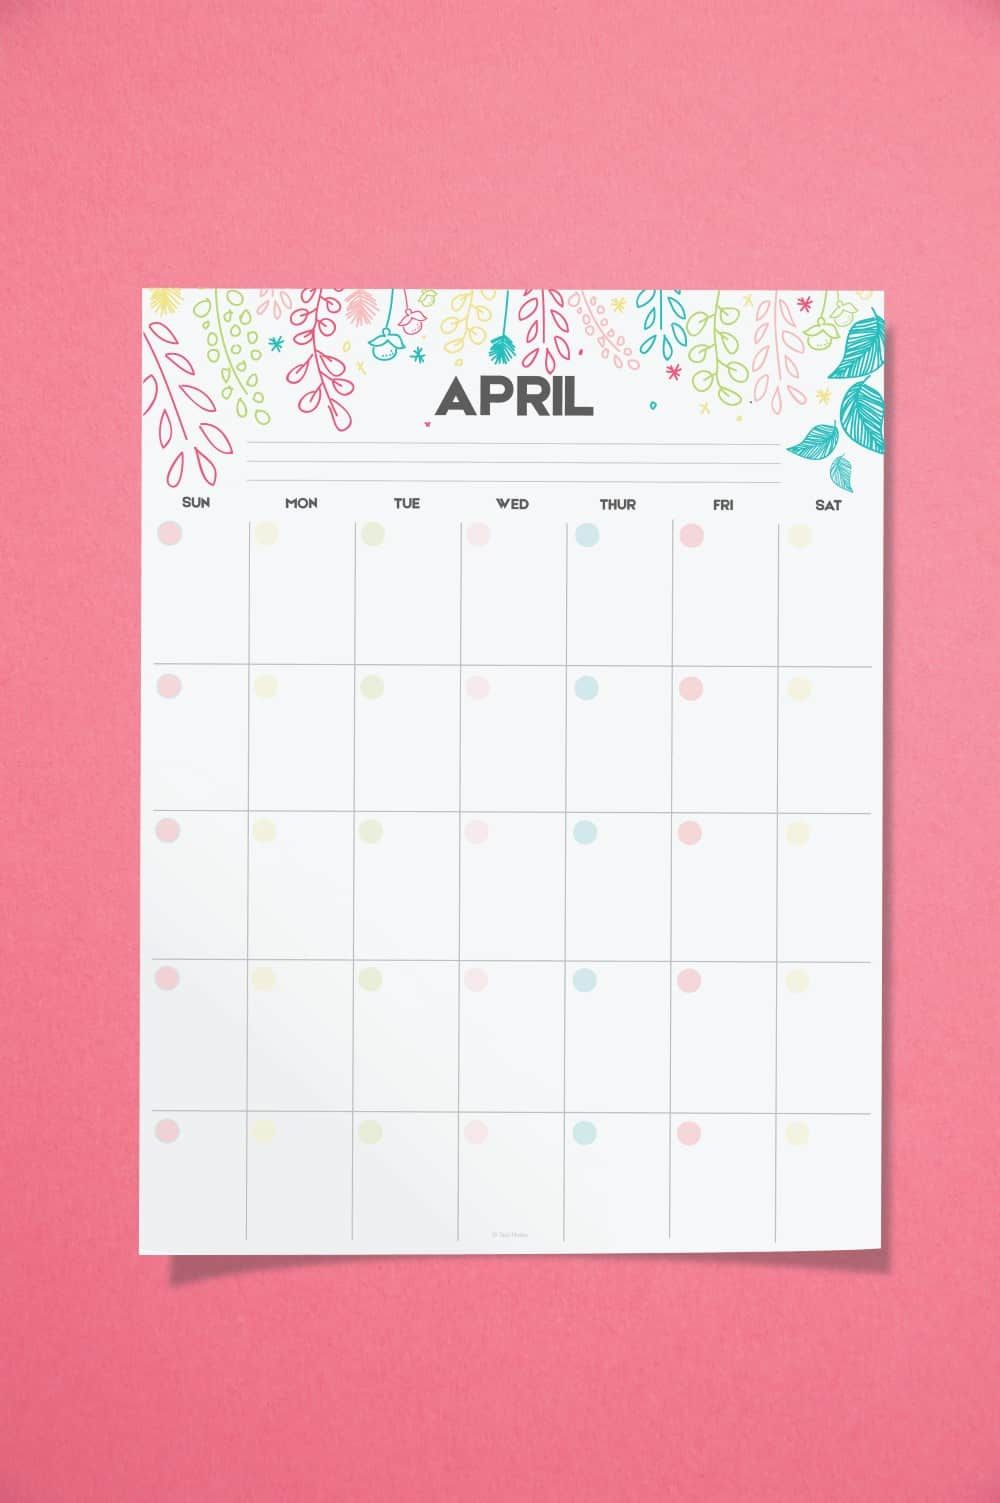 Free Printable Calendar: Fill In The Dates And Set Your Goals